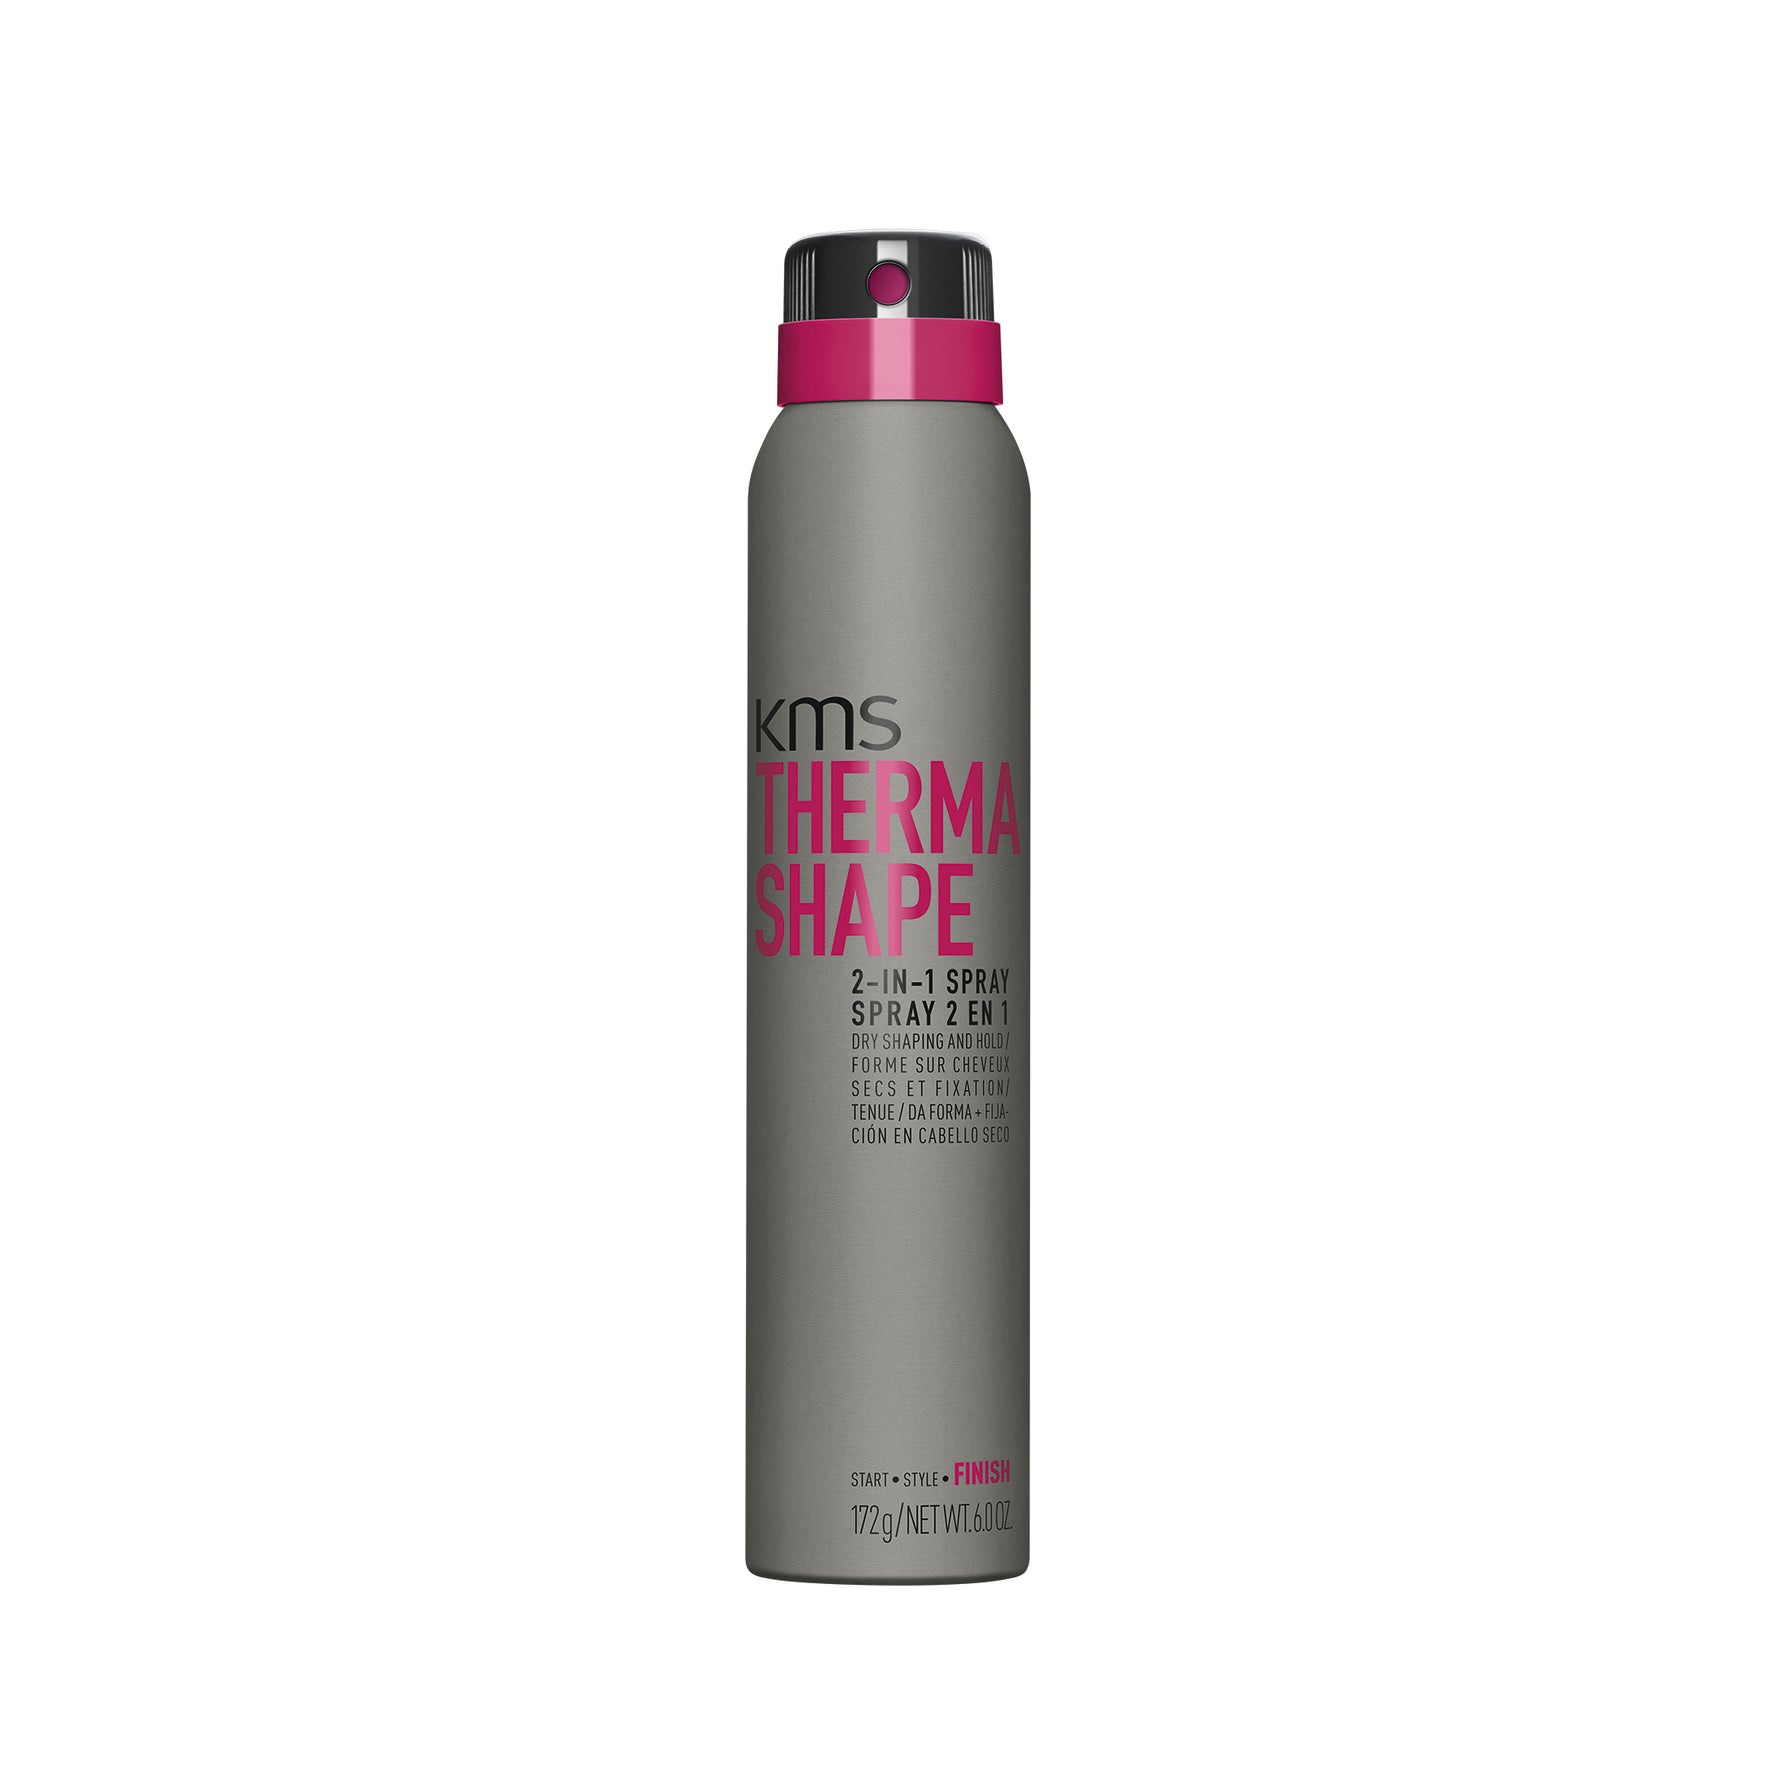 KMS Therma 2-in-1 Spray